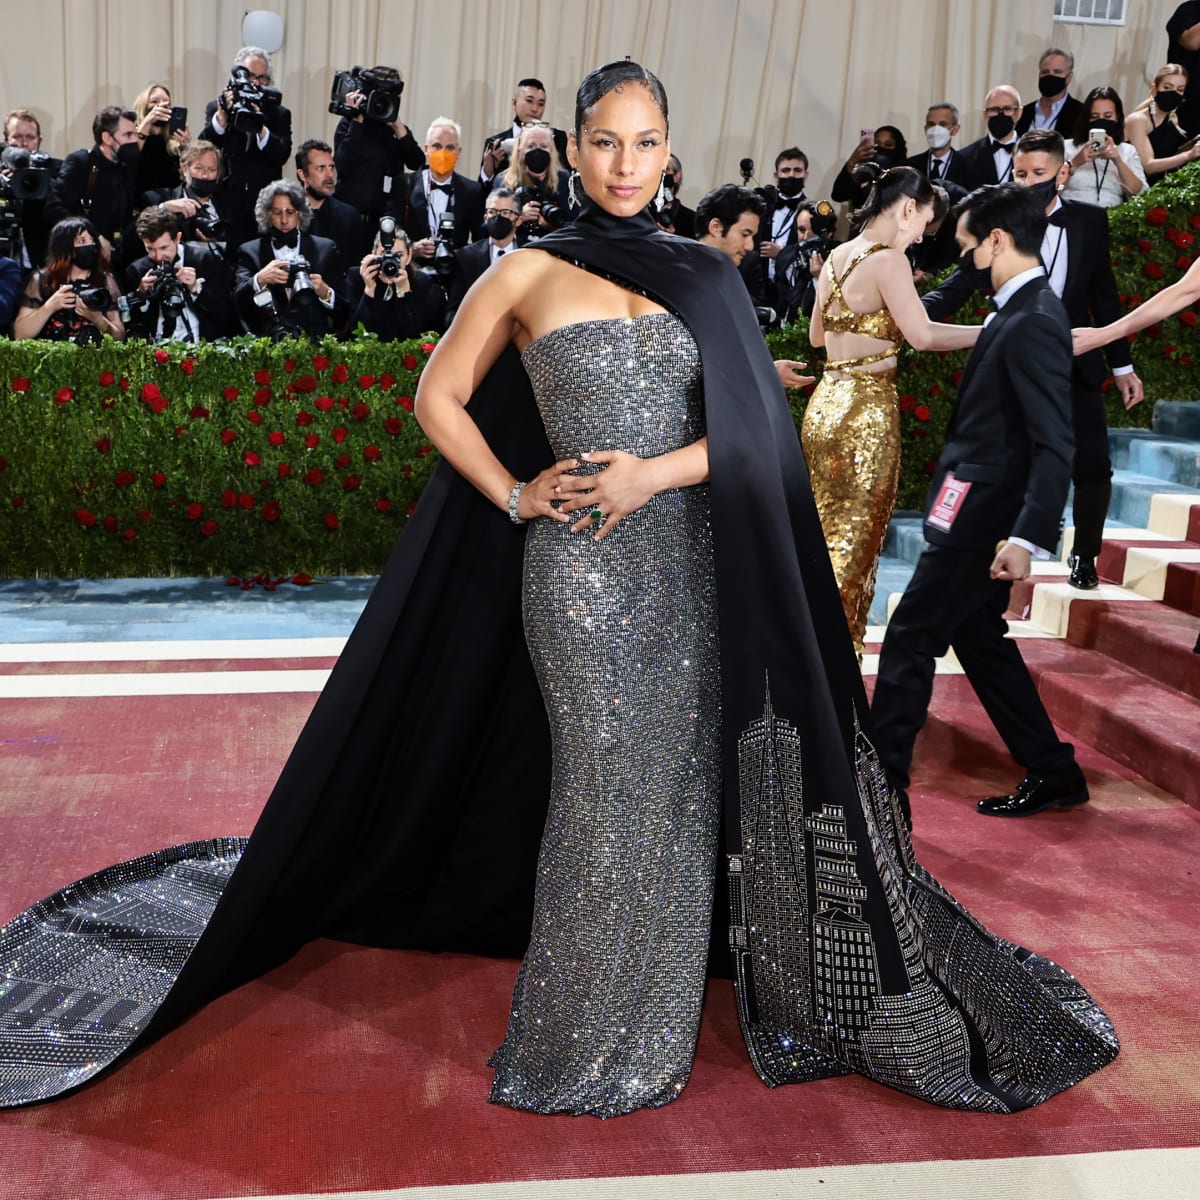 Ciara At The 2022 Met Gala Ciara's High-Slit Gown Sparkled On The